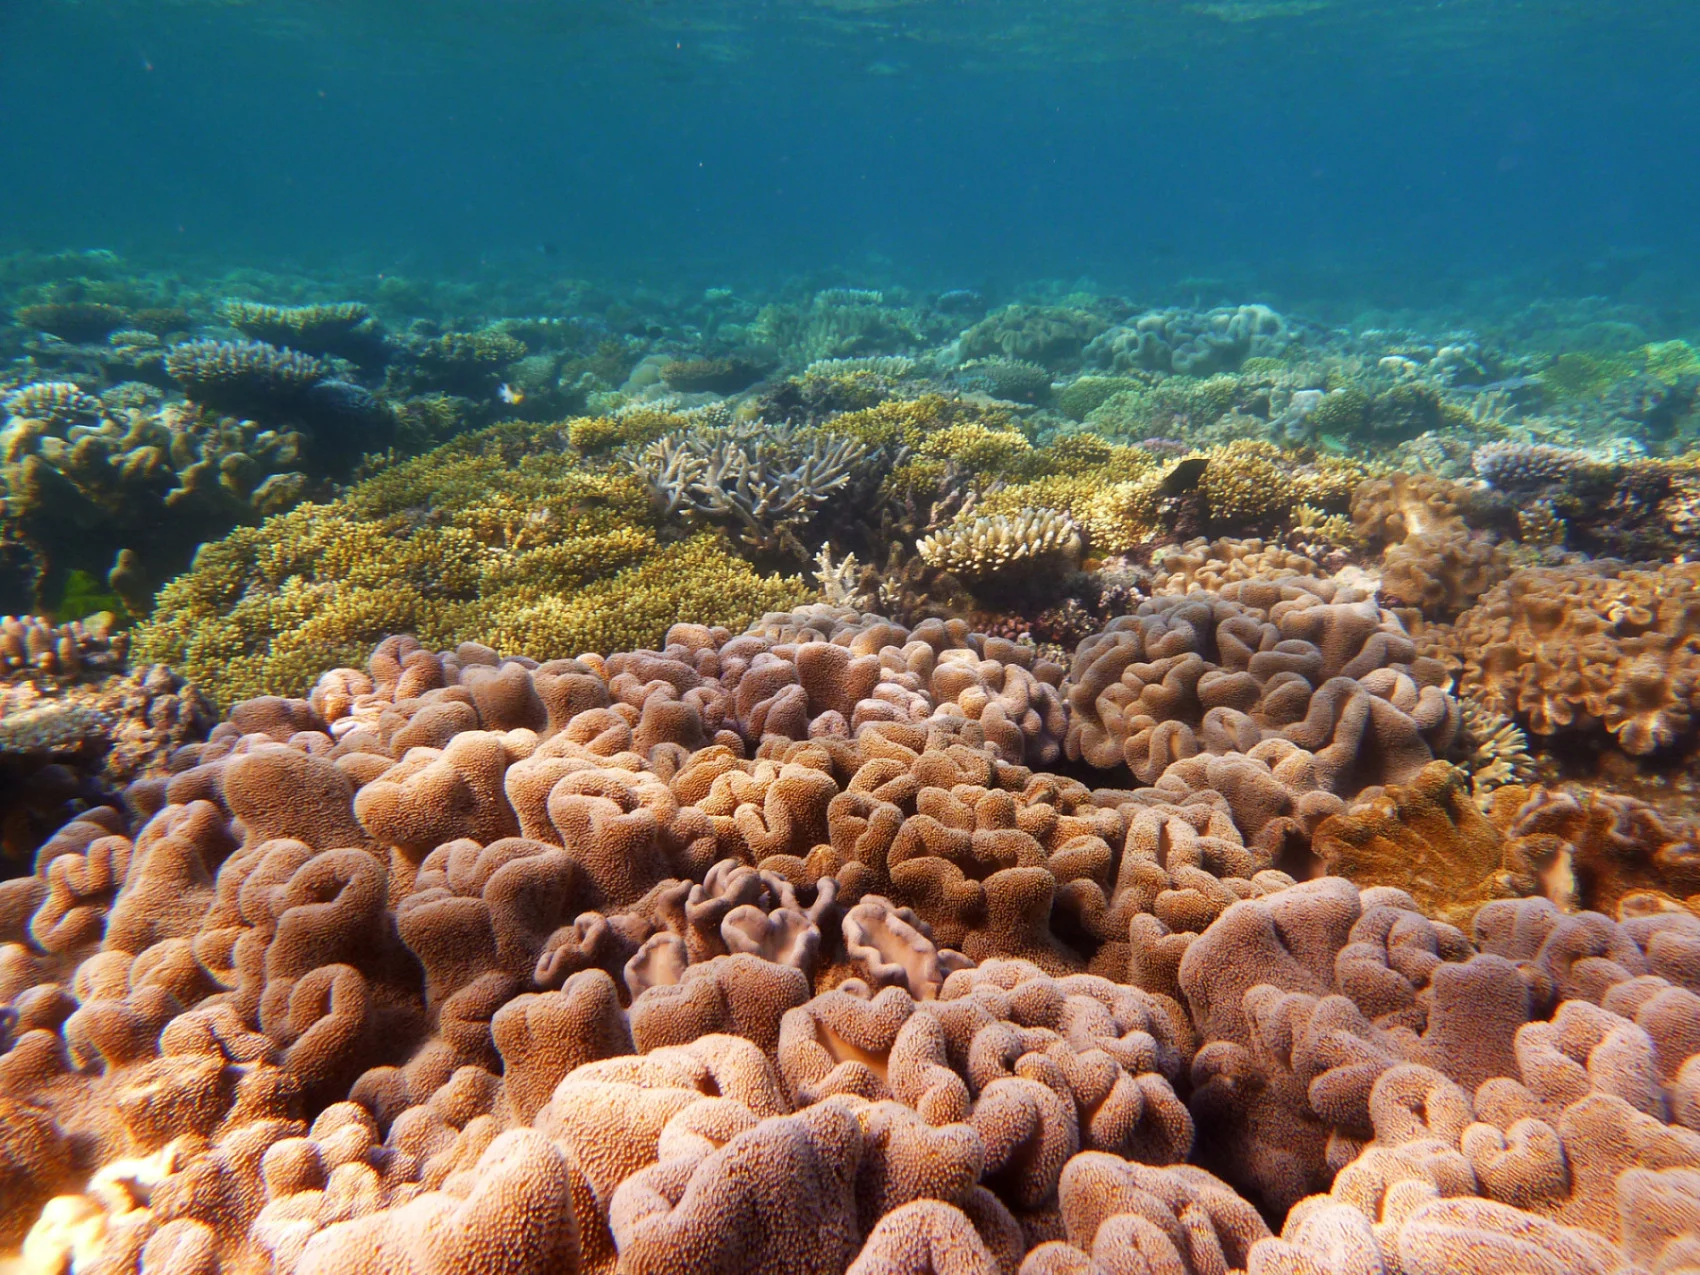 Over 90% of the Great Barrier Reef suffered bleaching in 2022